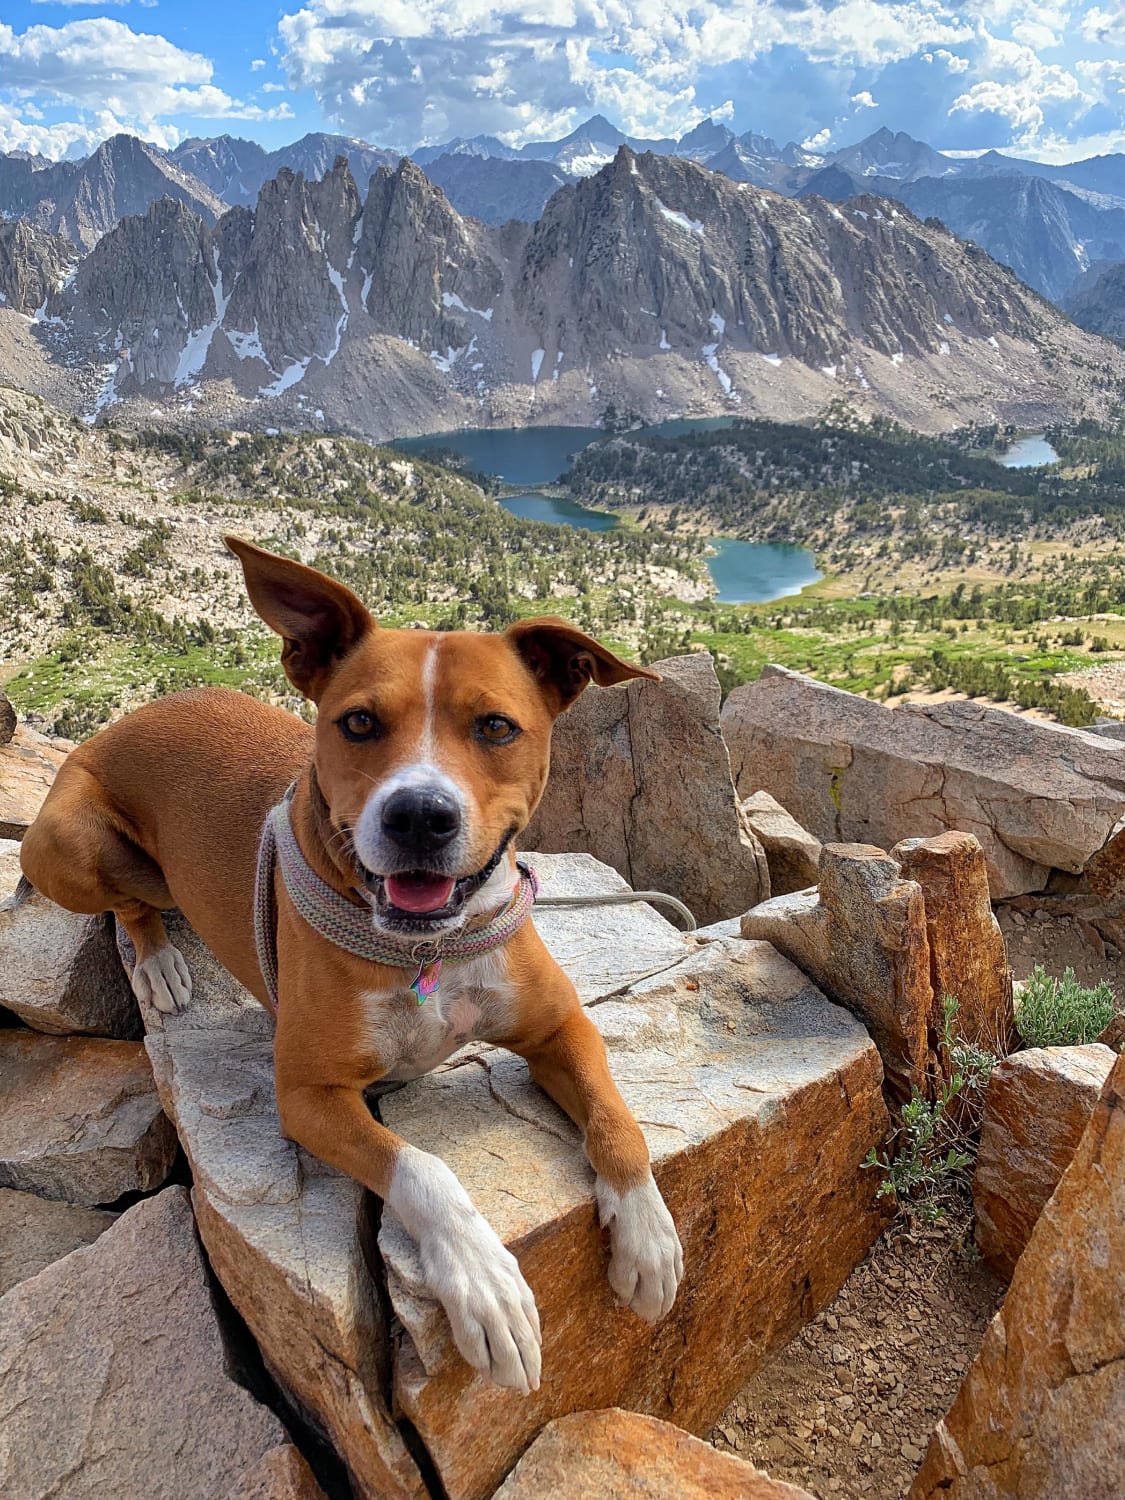 My pup, Lola, at one of my favorite spots in CA, Kearsarge Pass